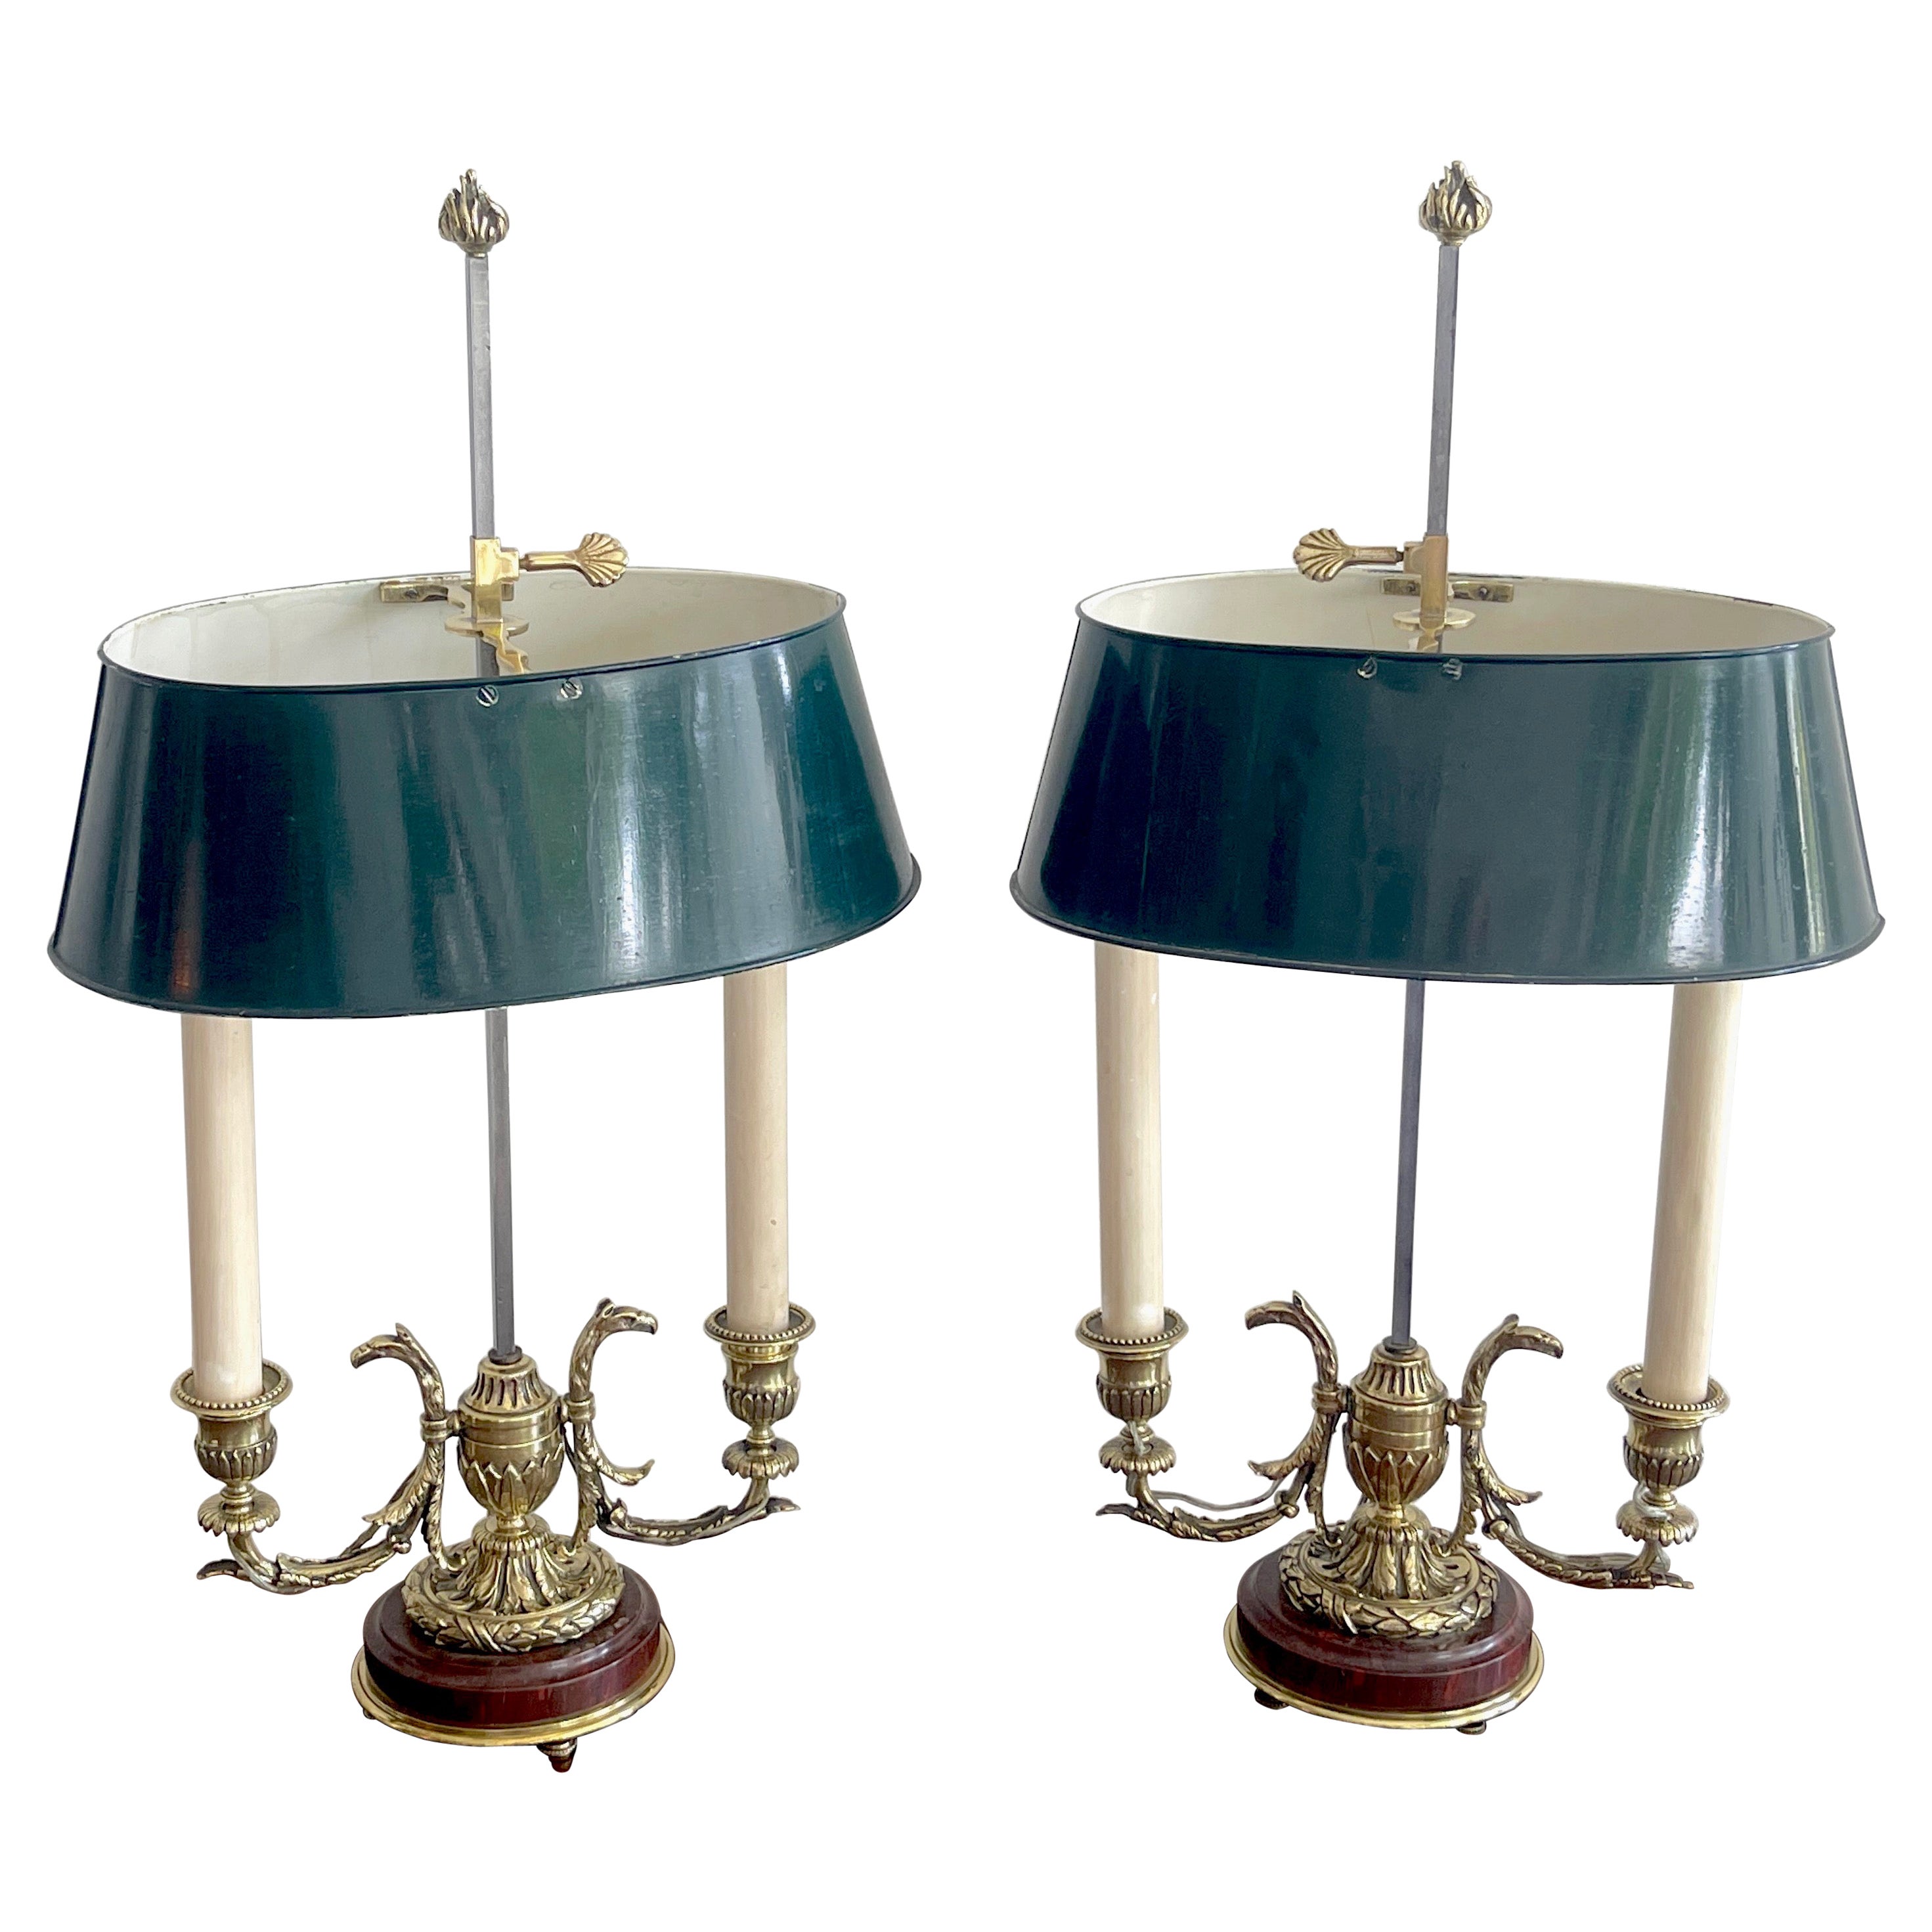 Pair of 19th C French Neoclassical Bronze & Tole Bouillotte Lamps